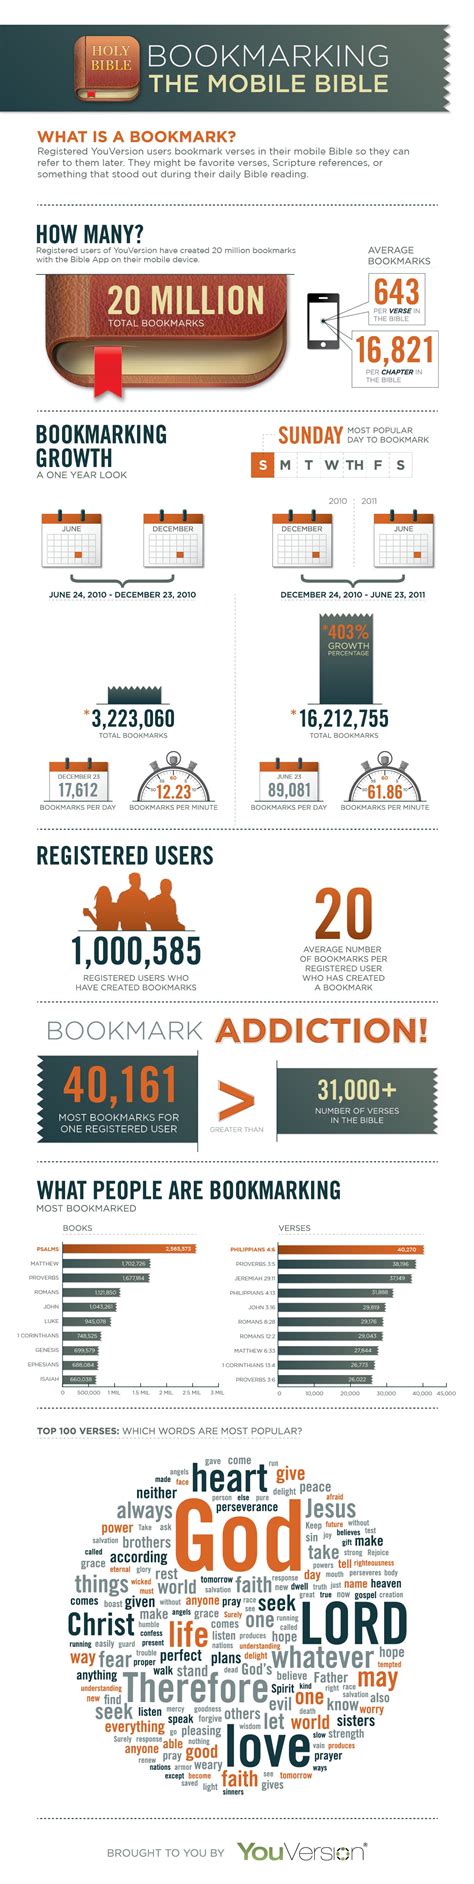 youversion reaches  million bookmarks infographic churchmag